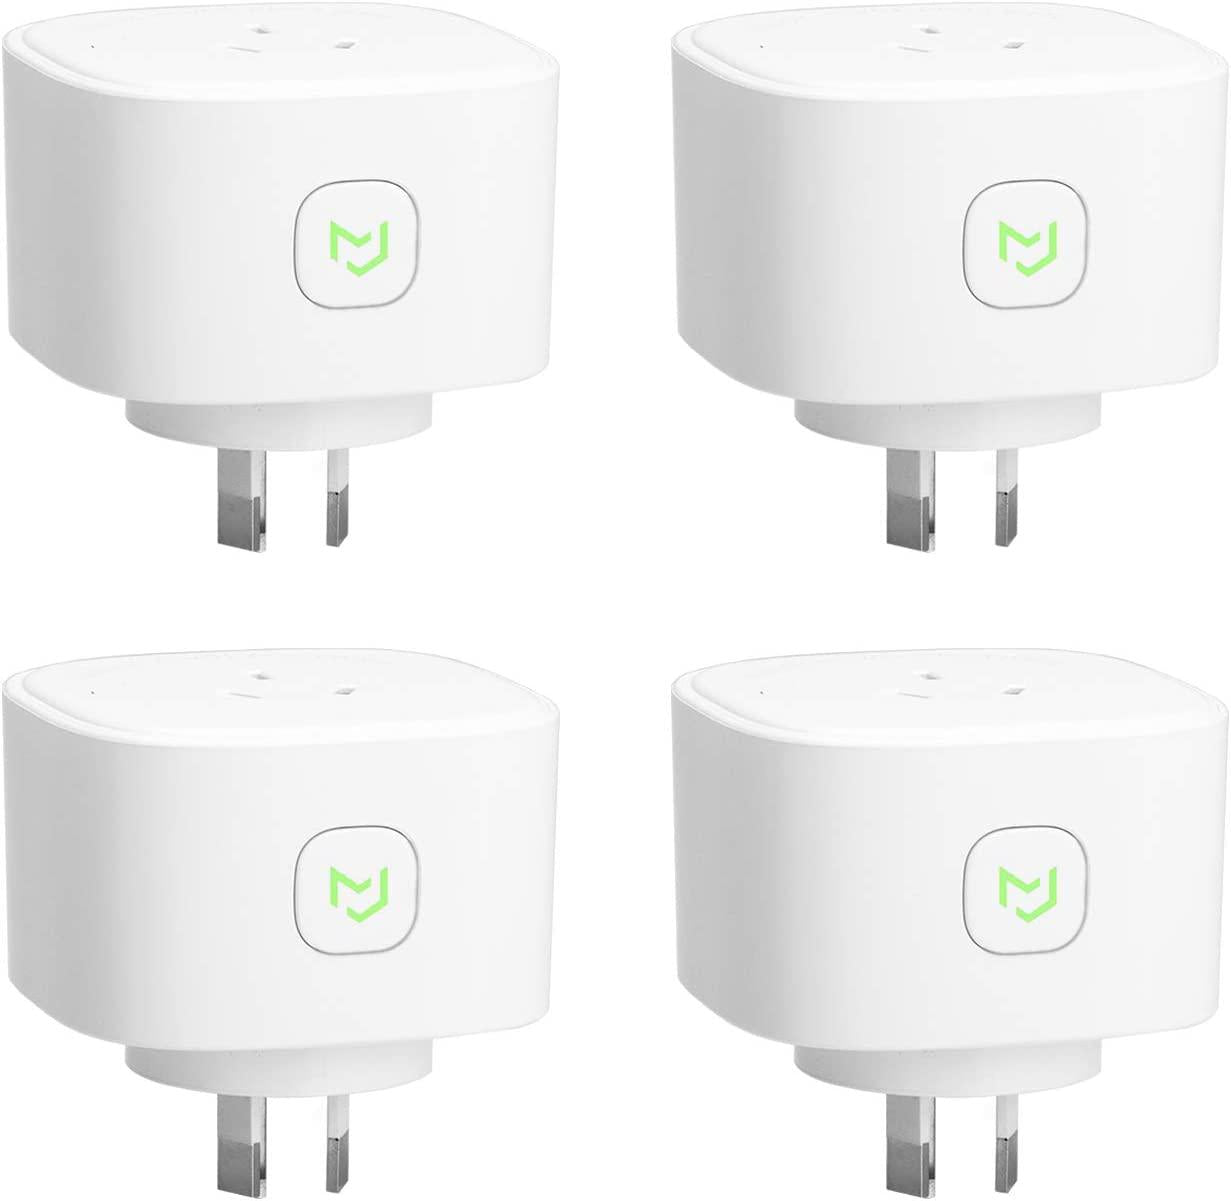 meross, meross Smart Plug WiFi Outlet with Energy Monitor, App Remote Control, Timing Function, Compatible with Alexa, Google Assistant, SmartThings, SAA and RCM Certified - 4 Pack